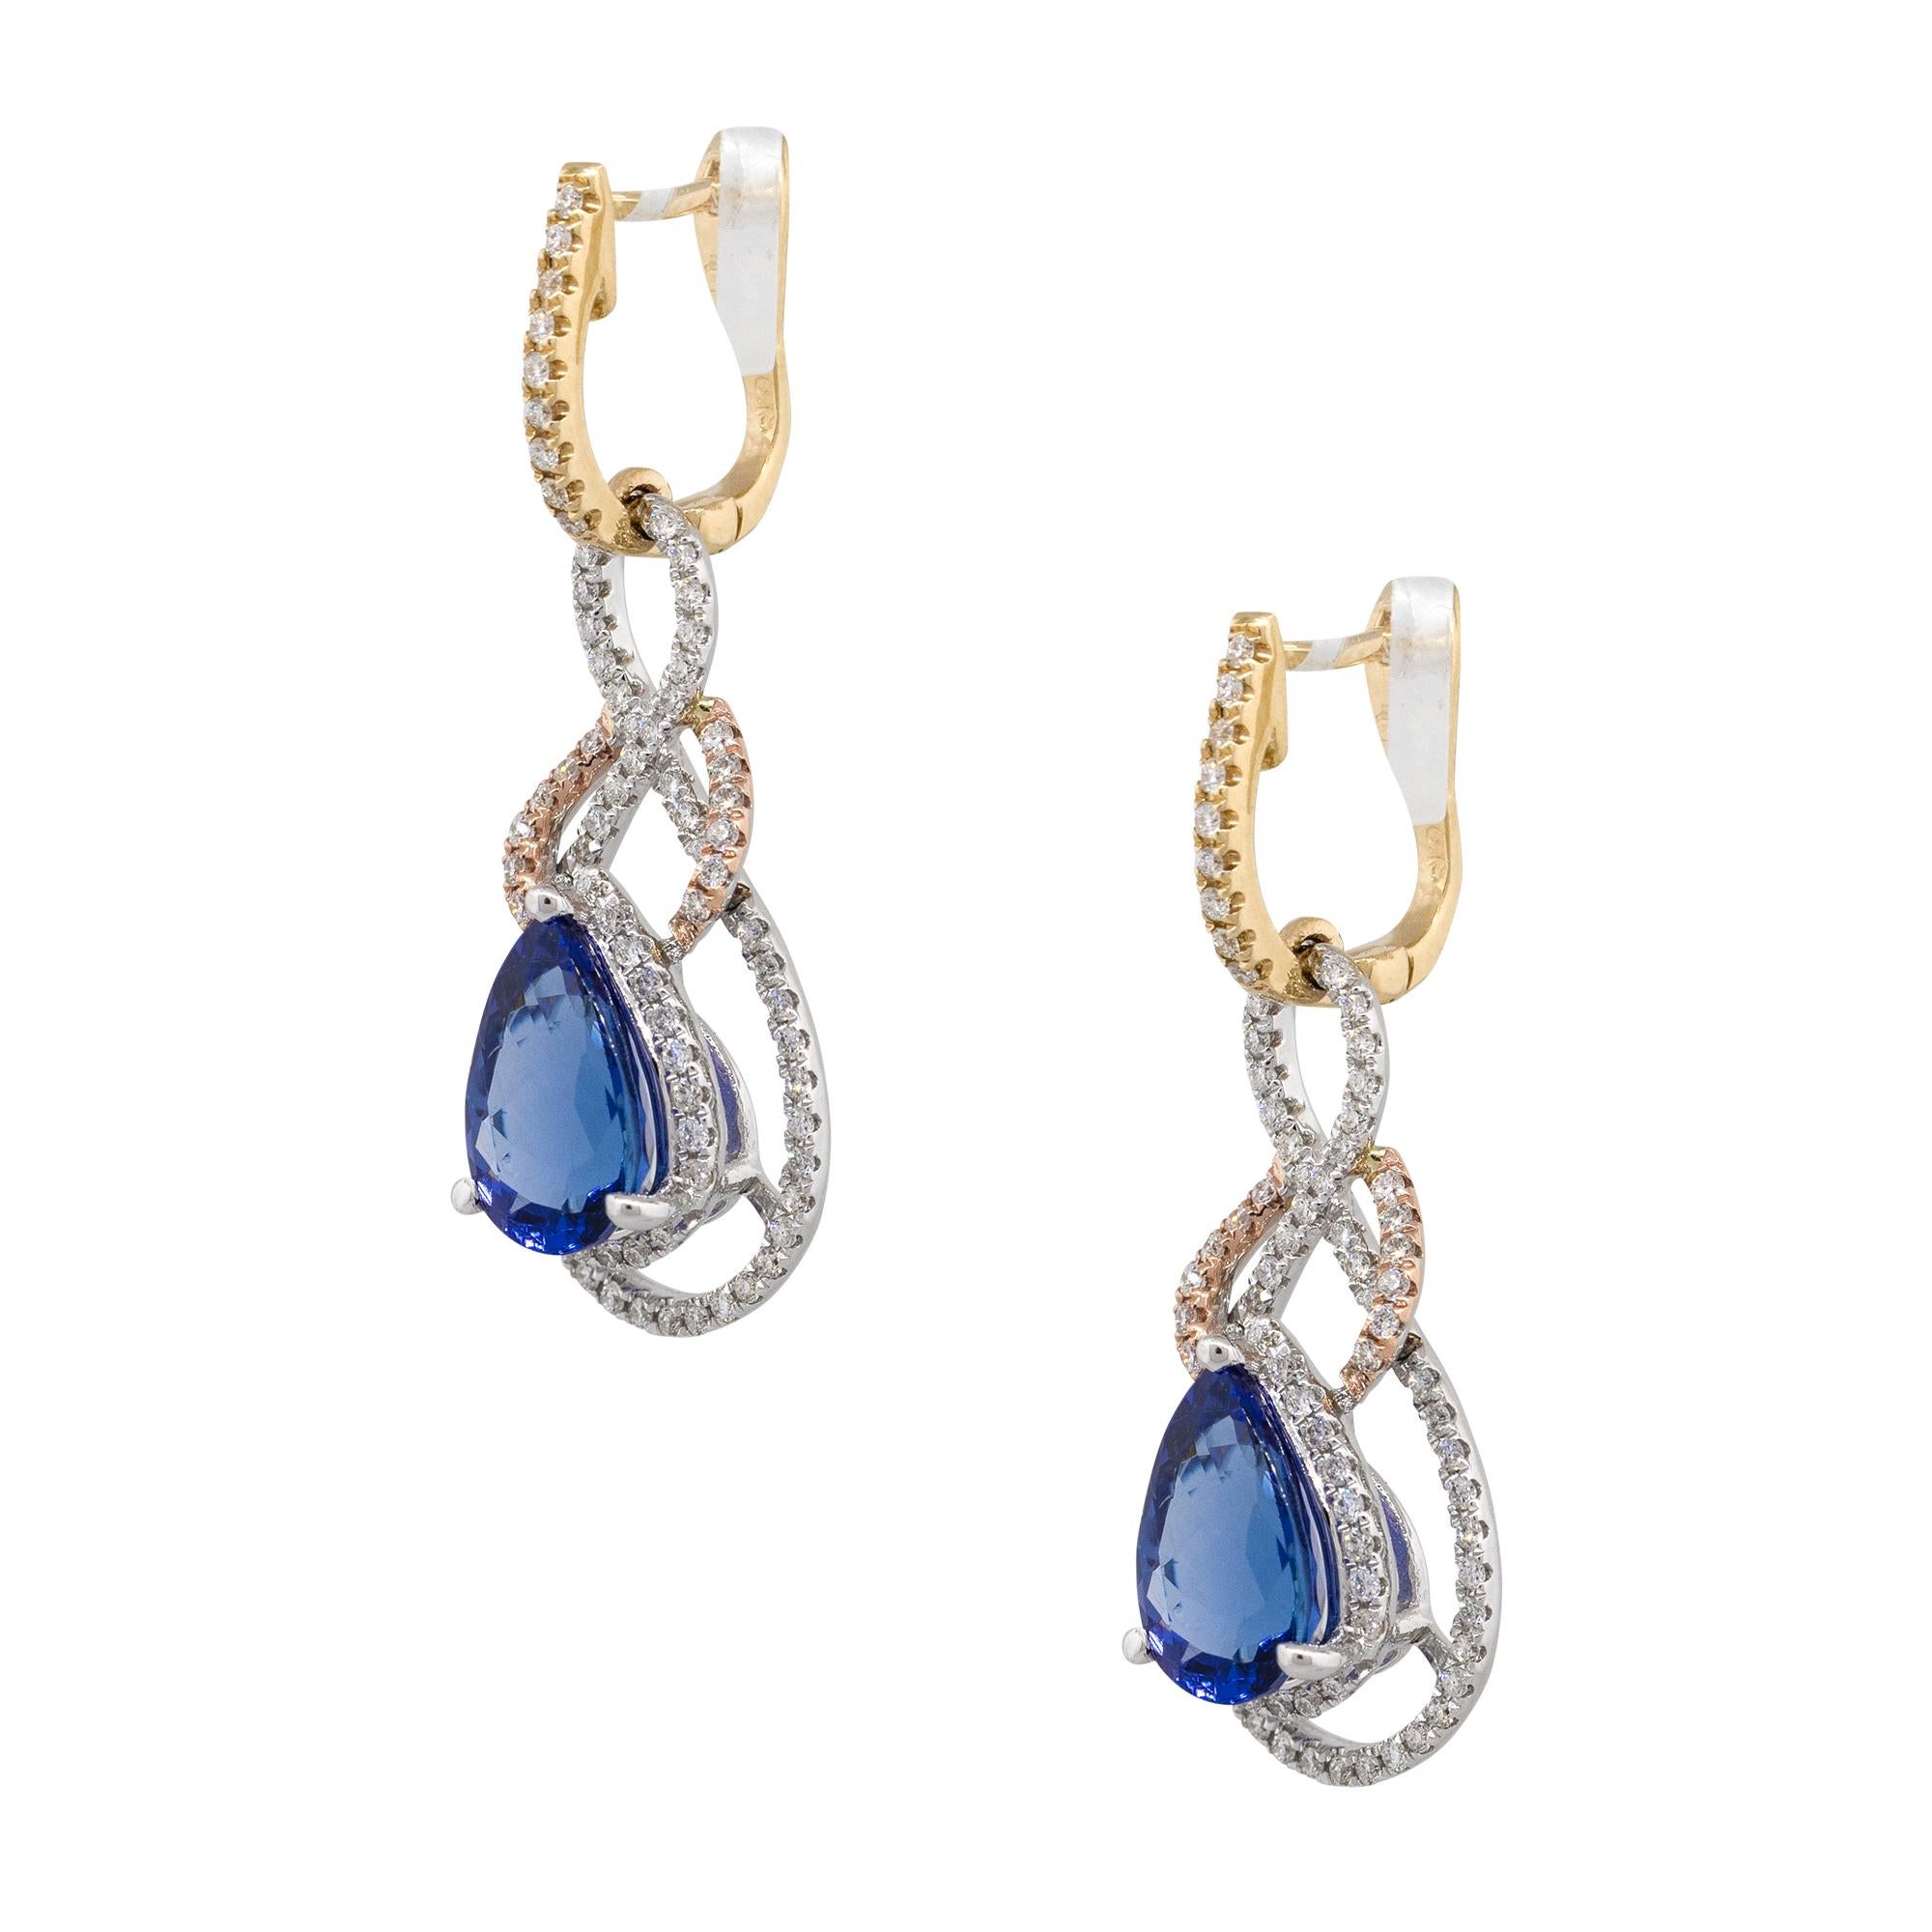 Material: 14k White gold & Rose gold
Style: Tanzanite Diamond Drop Earrings
Diamond Details: Approx. 0.88ctw of round cut diamonds. Diamonds are G/H in color and VS in clarity
Gemstone Details: Approx. 3.90ctw pear shape Tanzanite gemstones
Earring